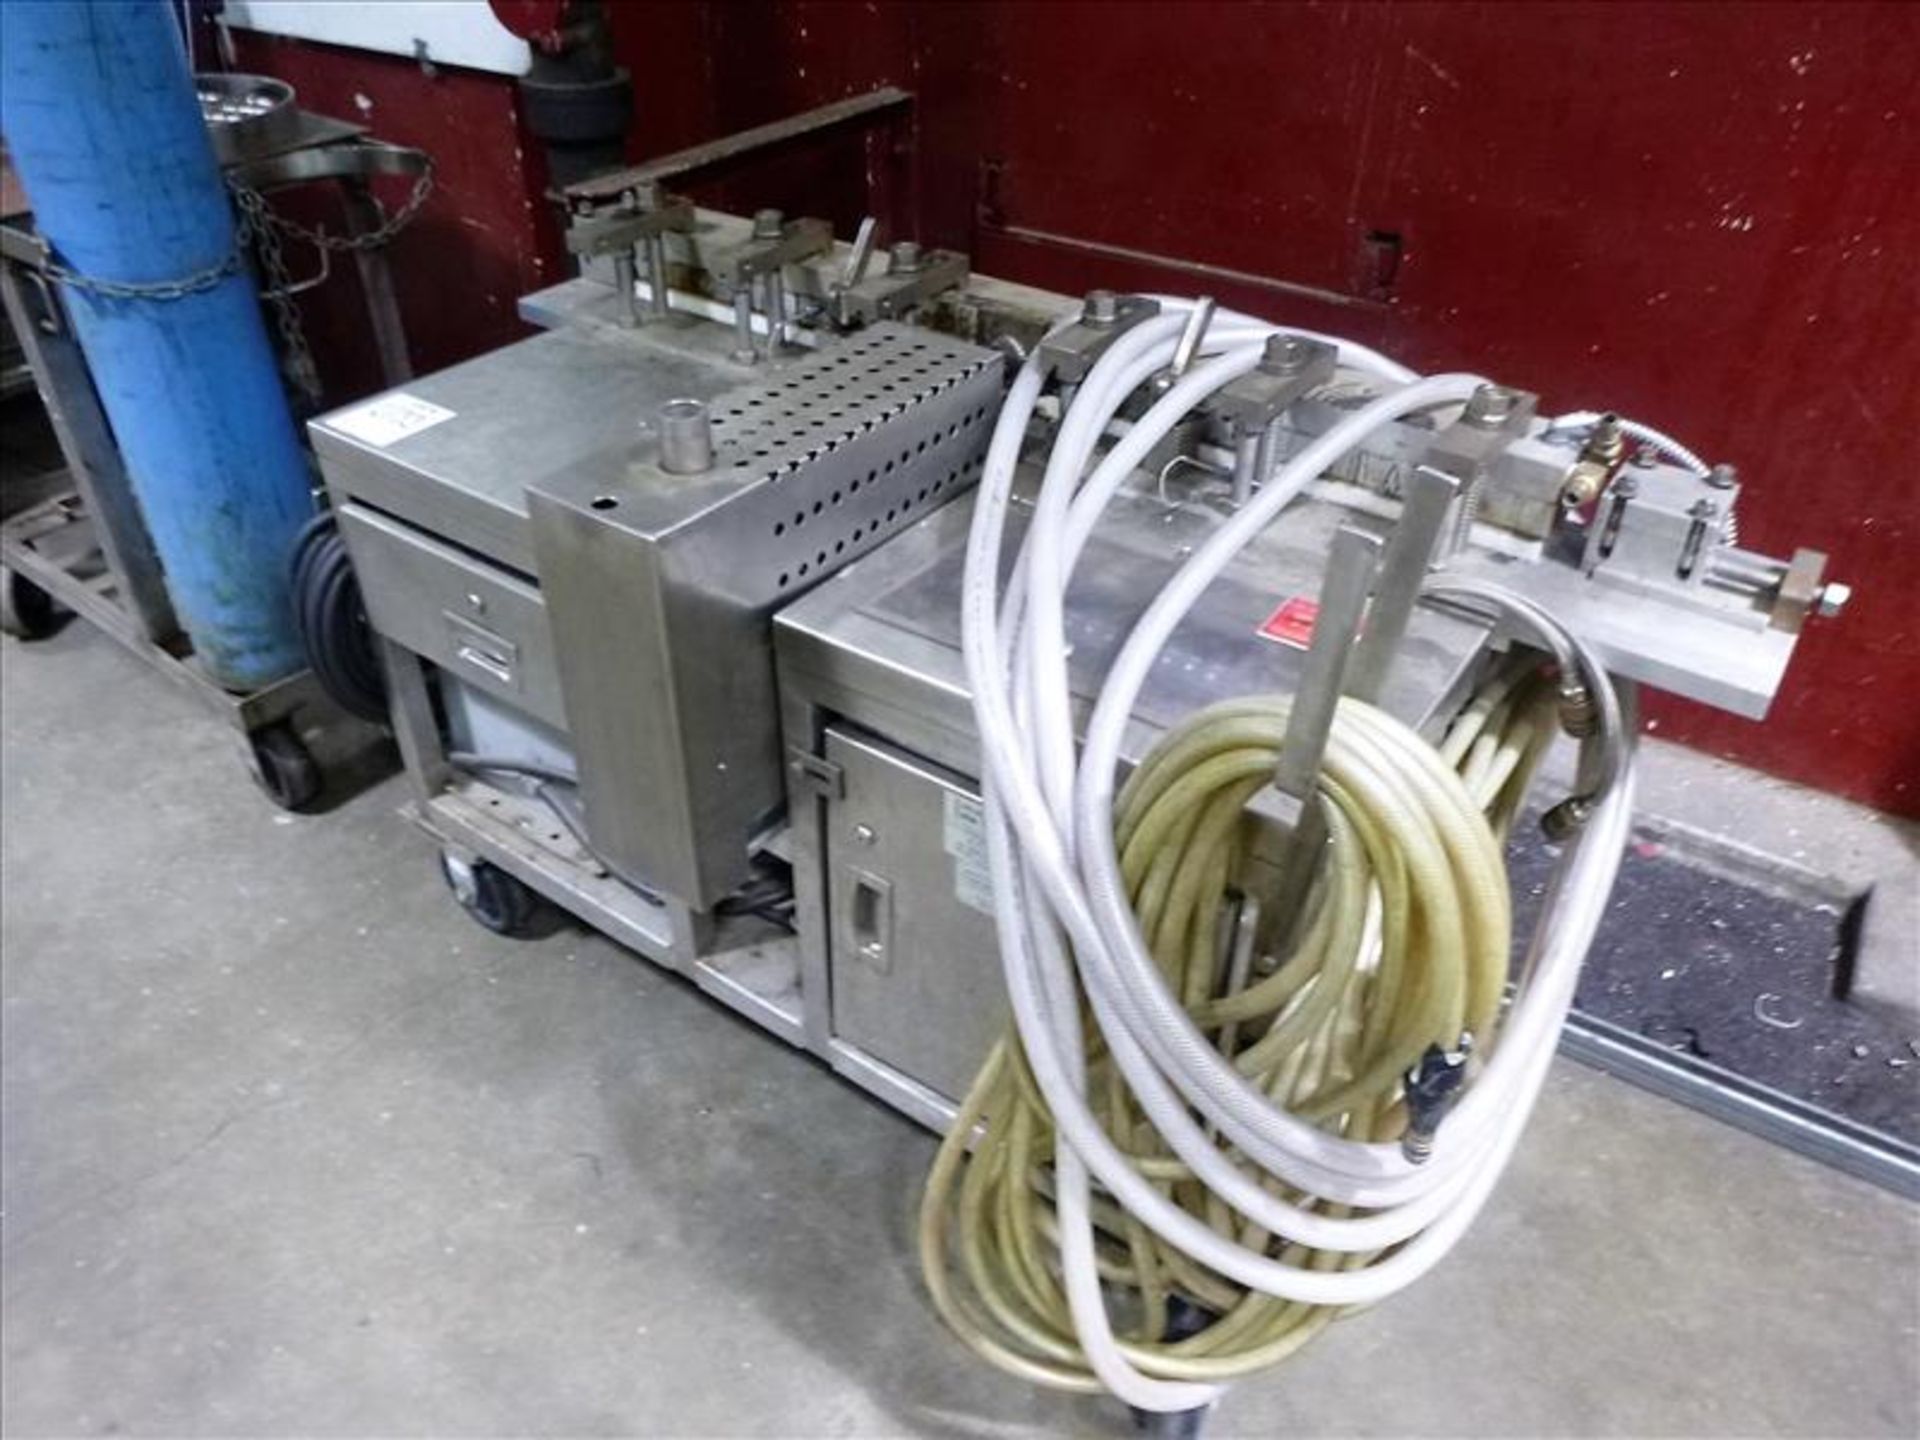 Extruda-Mold s/s cable splicing machine [2nd Floor] - Image 3 of 3